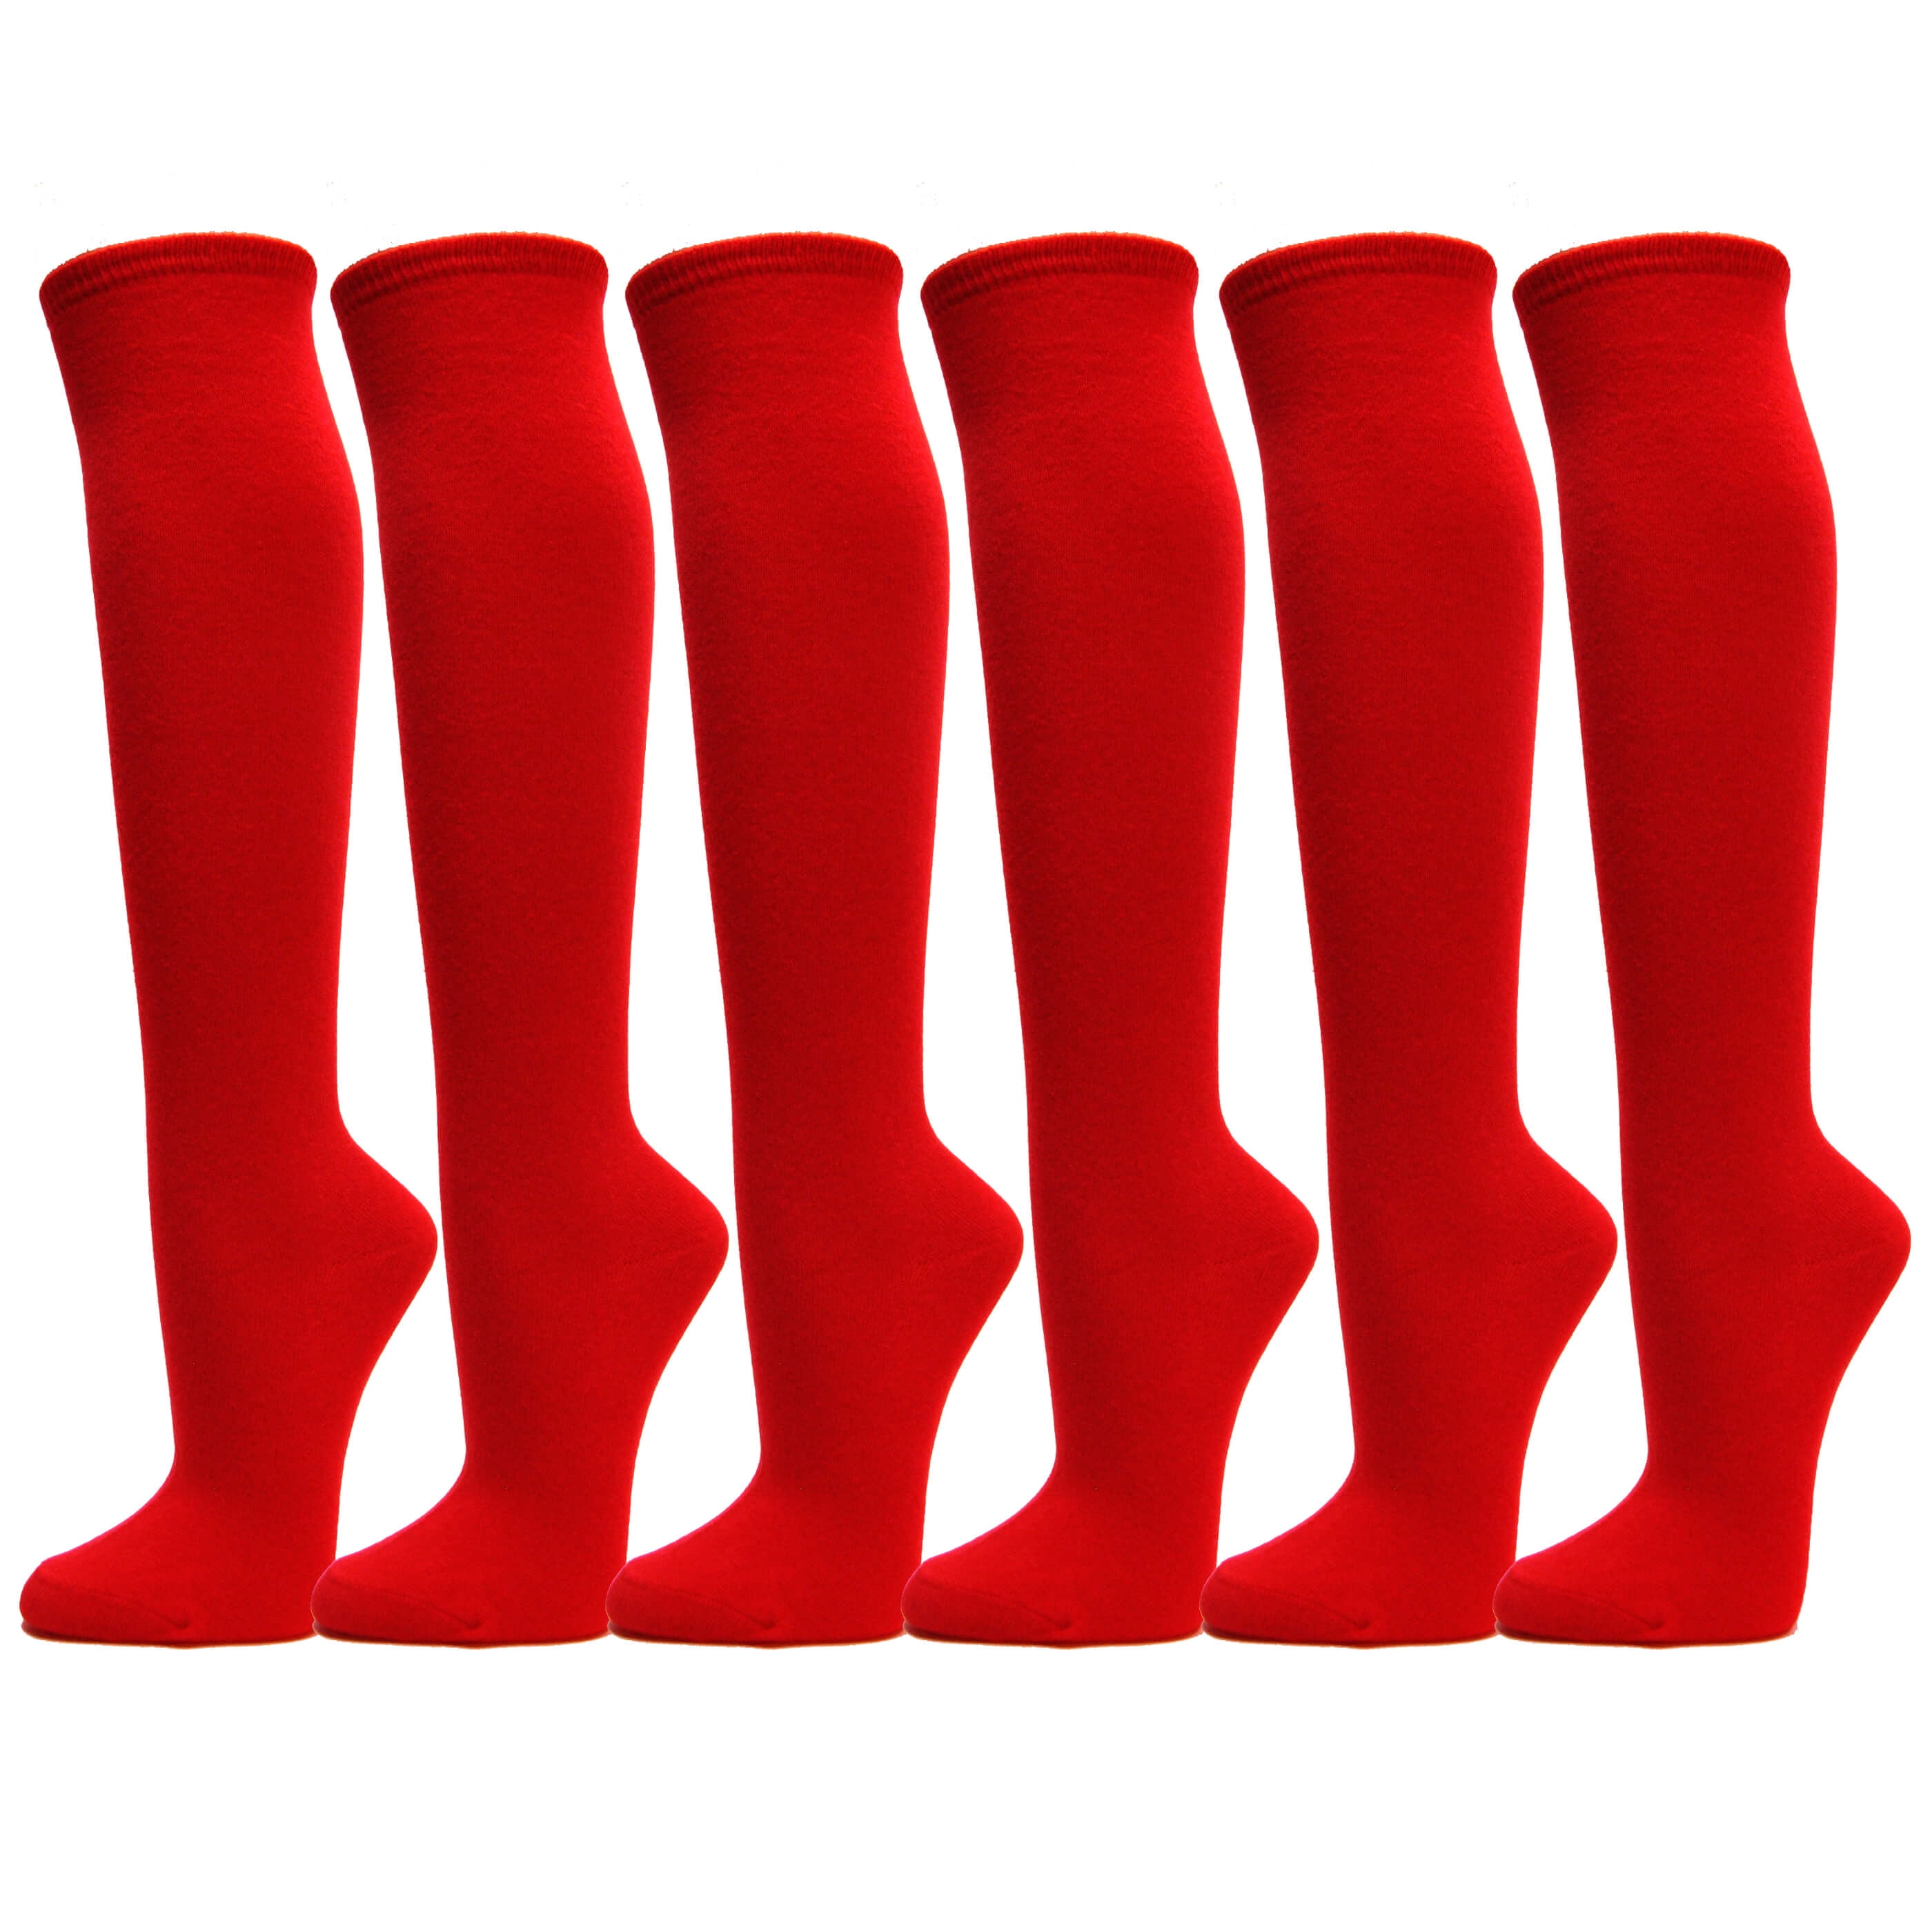 Couver Cotton Knee High Referee Socks Multi-Assorted Pack 